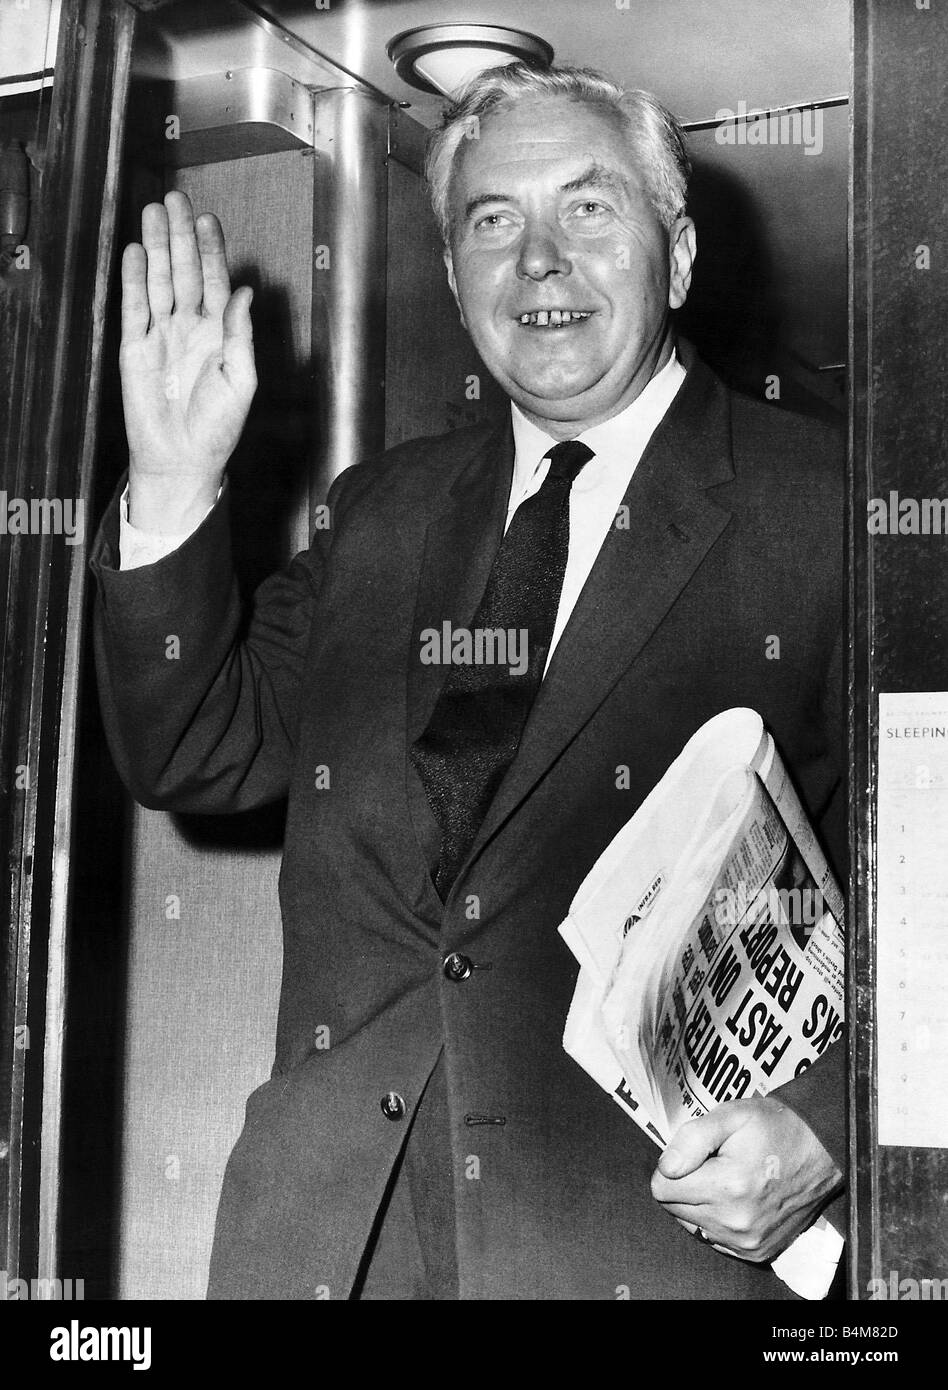 harold-wilson-prime-minister-waving-and-holding-a-newspaper-under-B4M82D.jpg